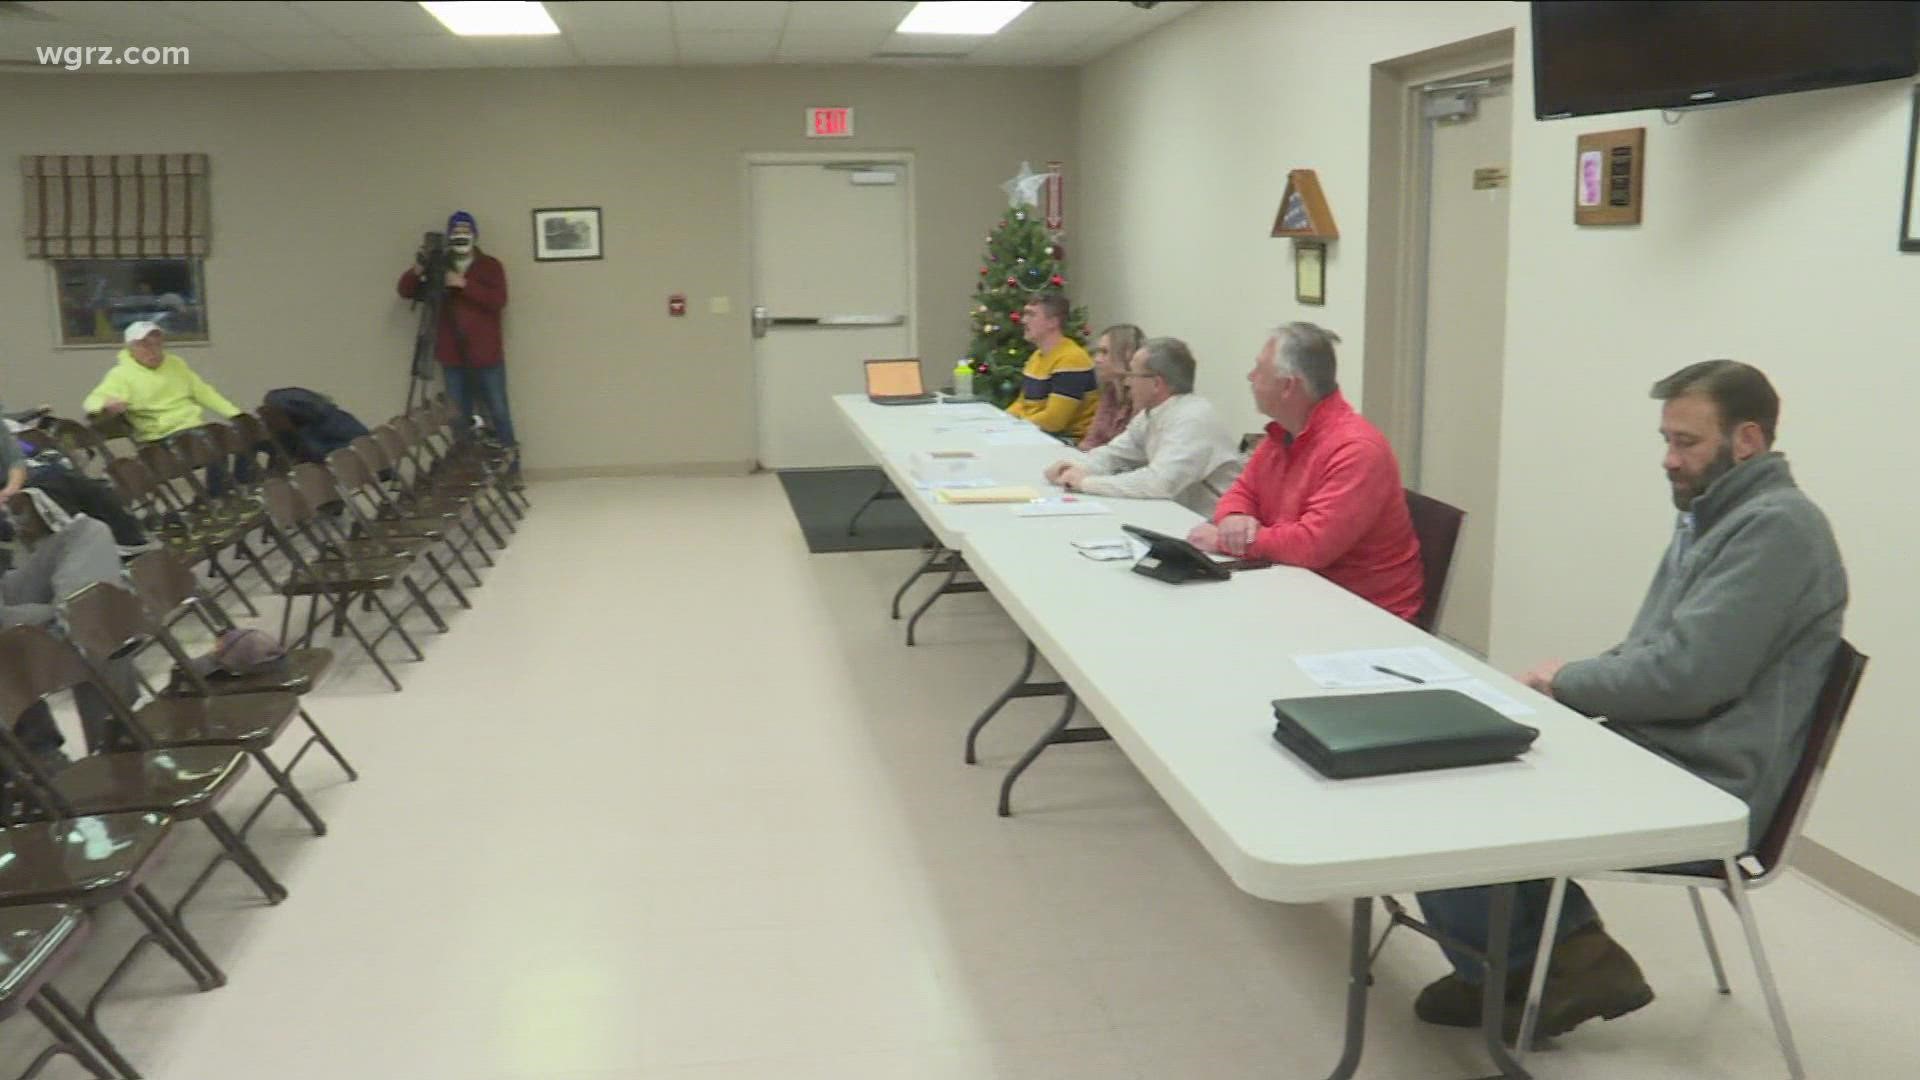 Marilla town board also voted in favor of a resolution rejecting Erie County's COVID-19 mandates.